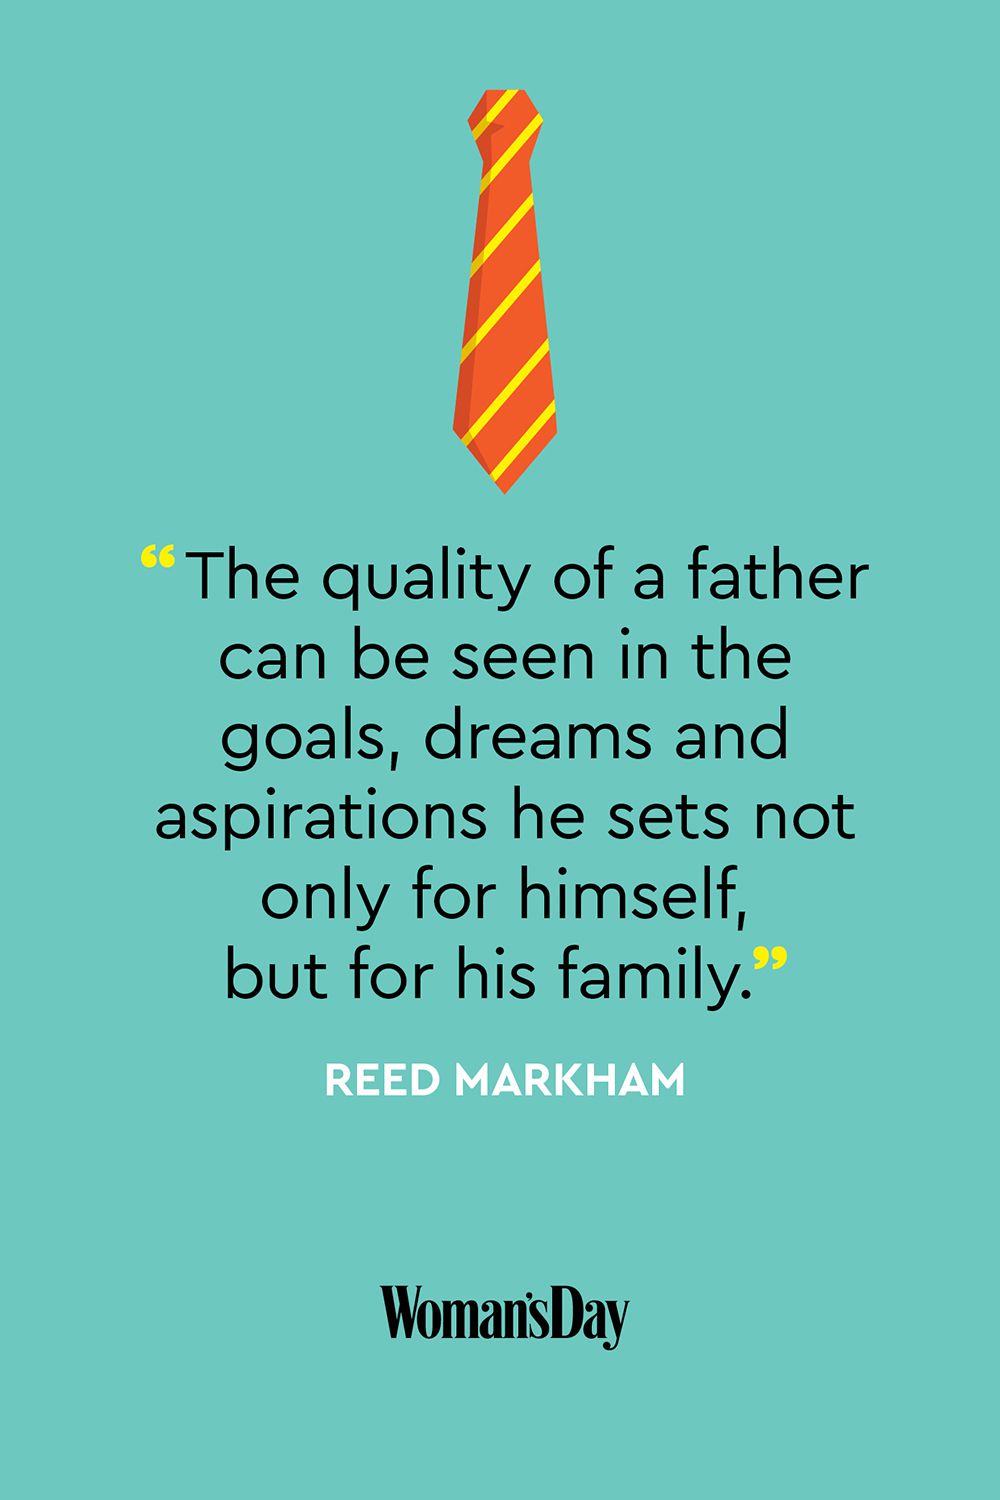 Father's Day 2019 best wishes messages and quotes